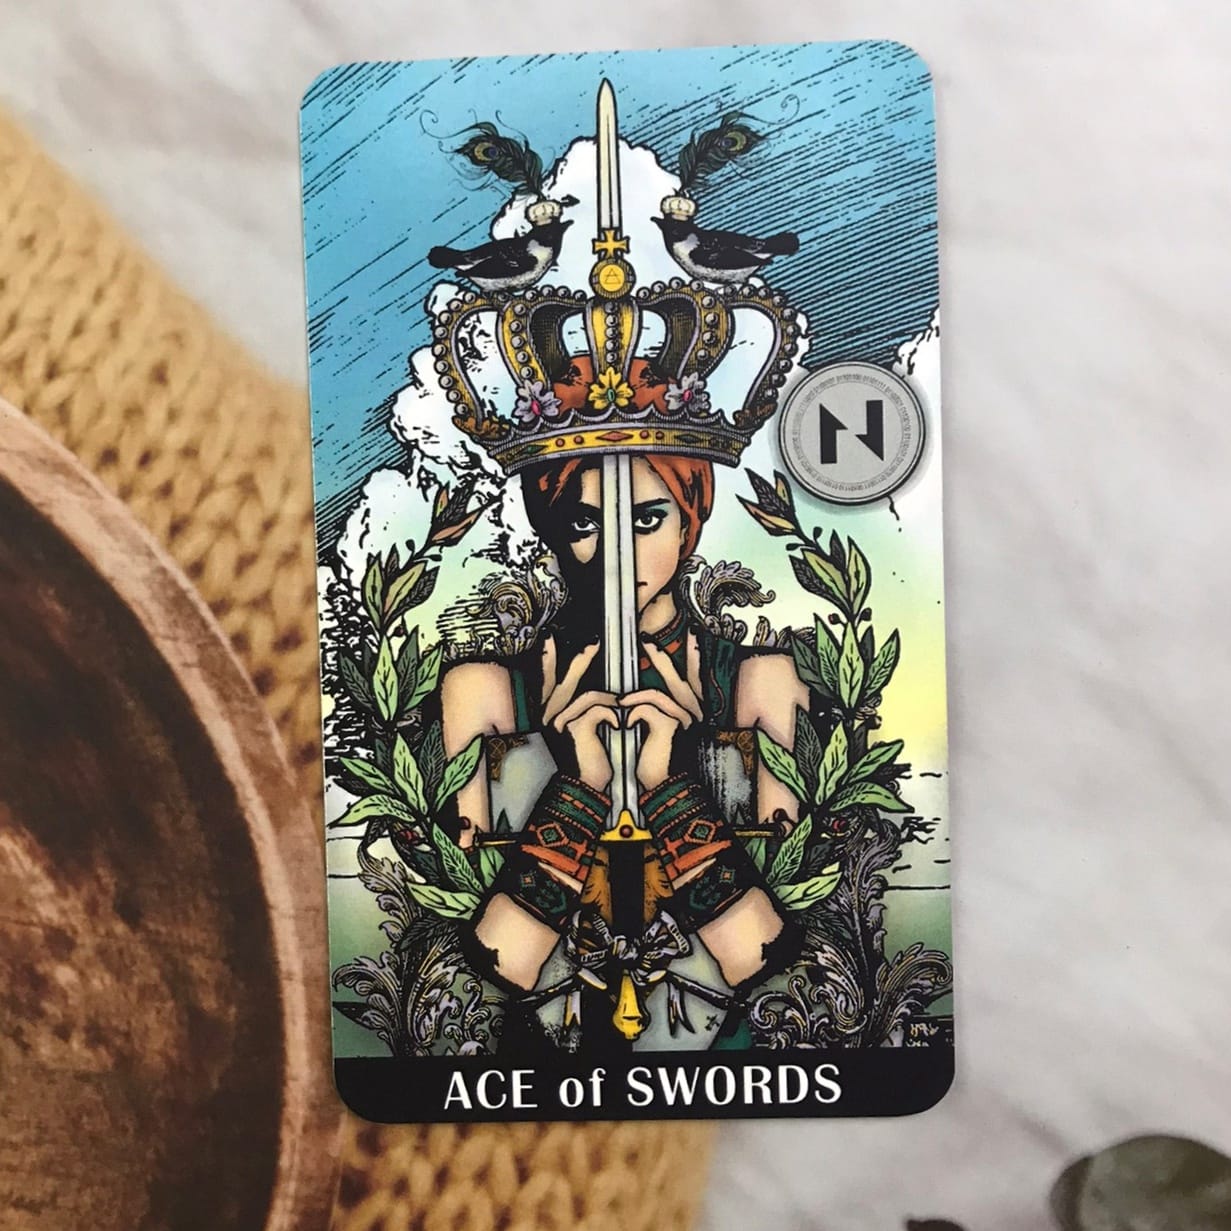 Ace of Swords Meaning